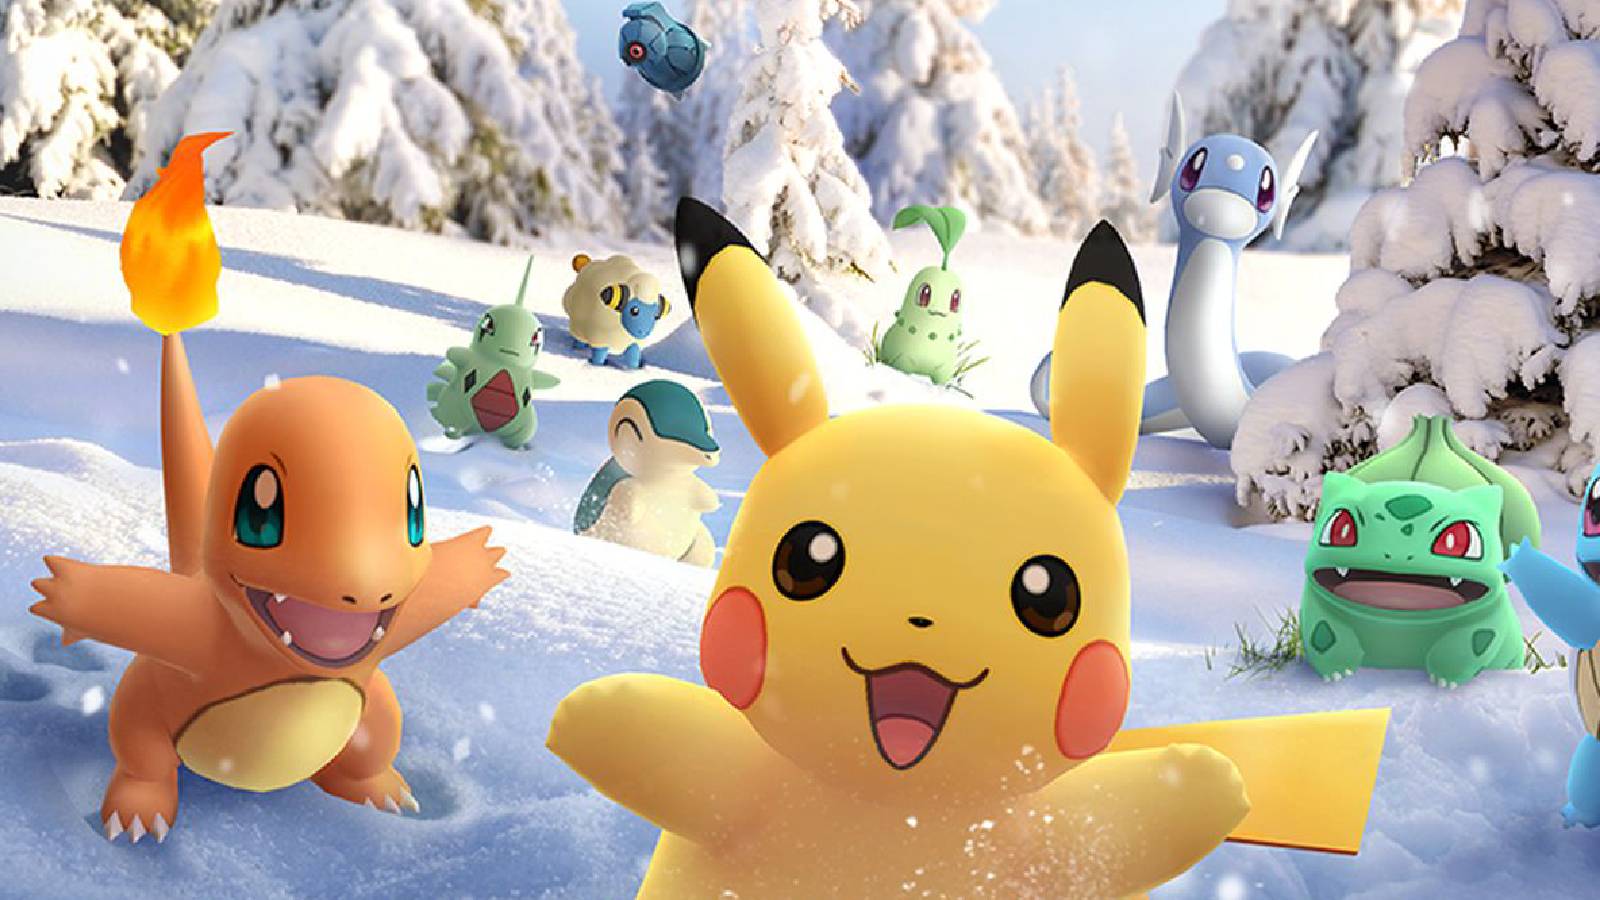 A Pokemon Go player shares a useful farming strategy for Winter Holiday Stardust